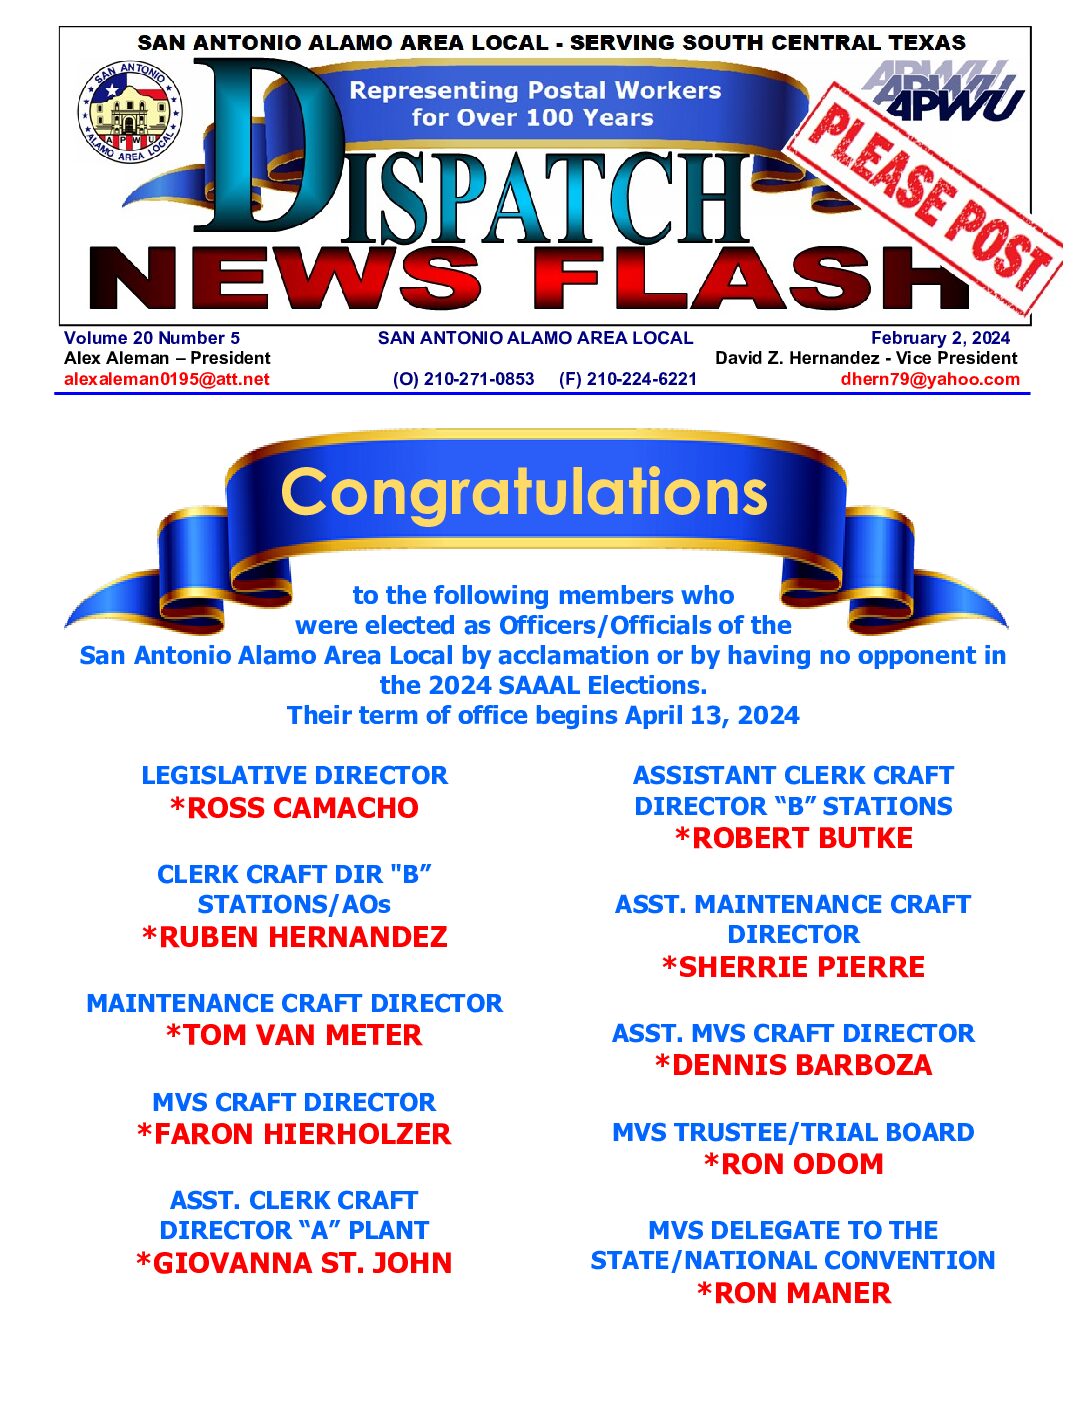 NewsFlash 20-5 Officer Elected by Acclamation - 